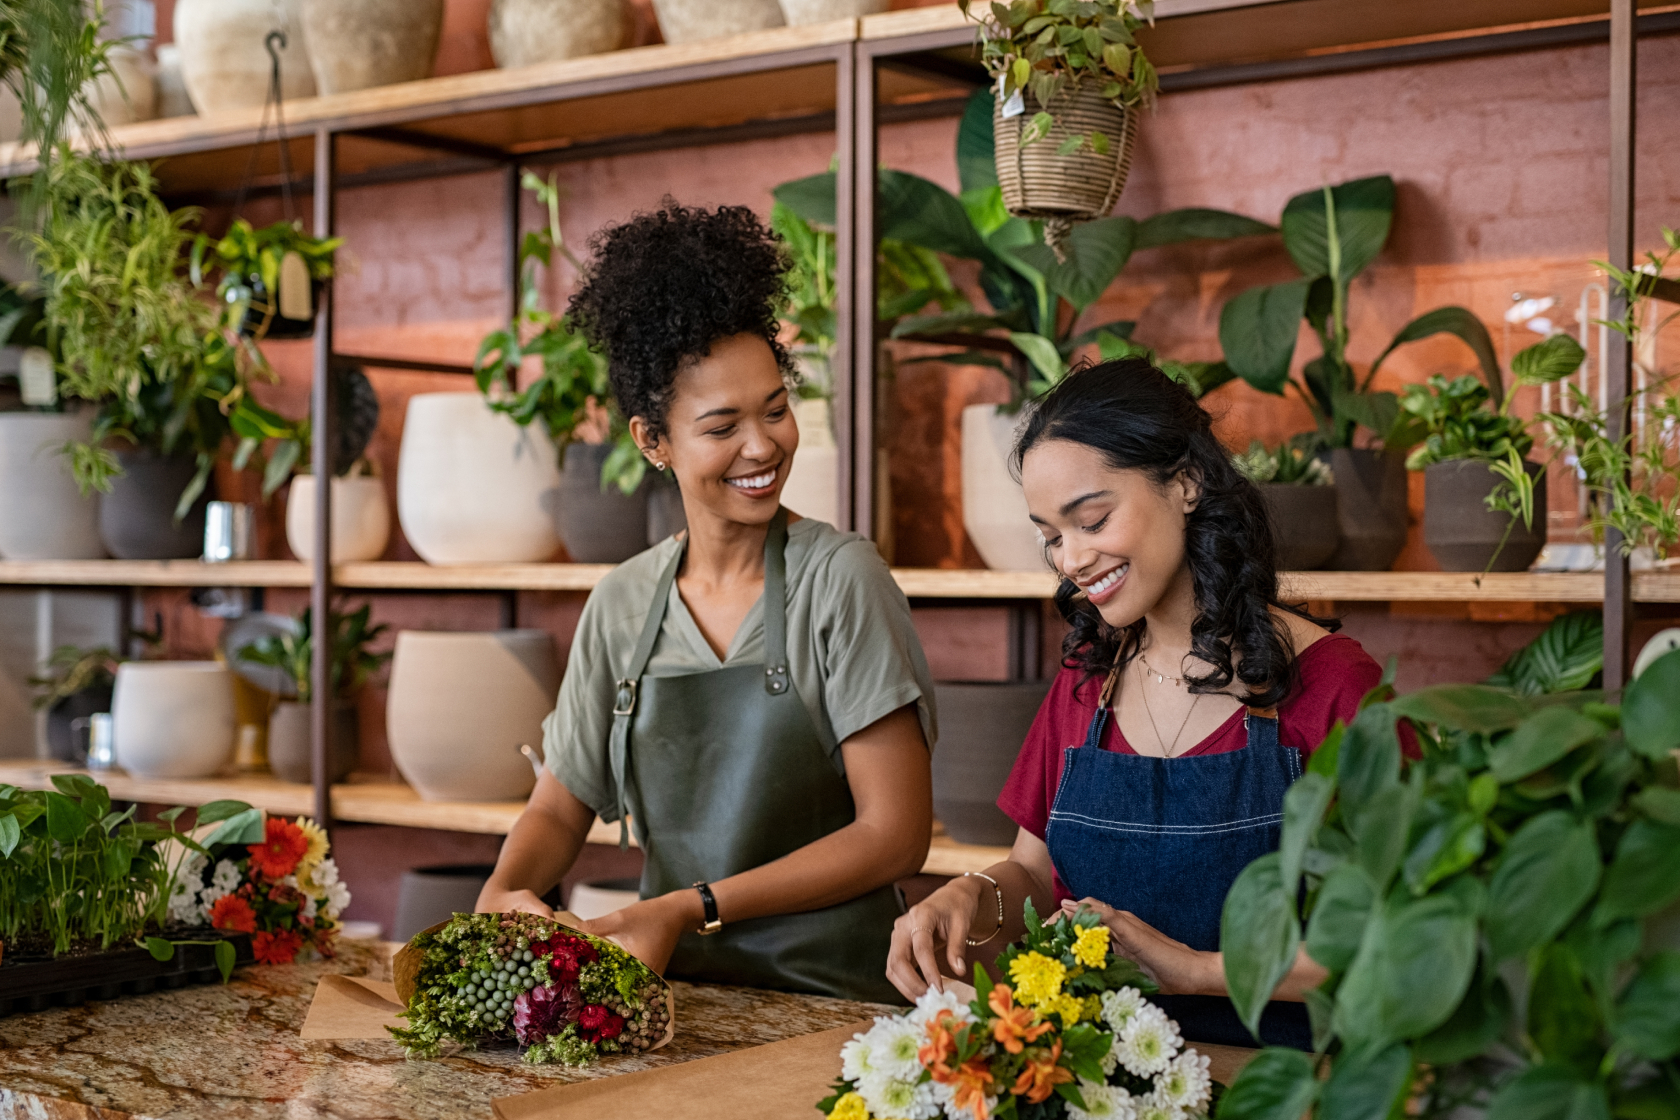 Owners of a plant shop work at the counter. Forming an LLC requires you to file articles of organization, sometimes called a certificate of organization, with the state. Requirements vary by state.